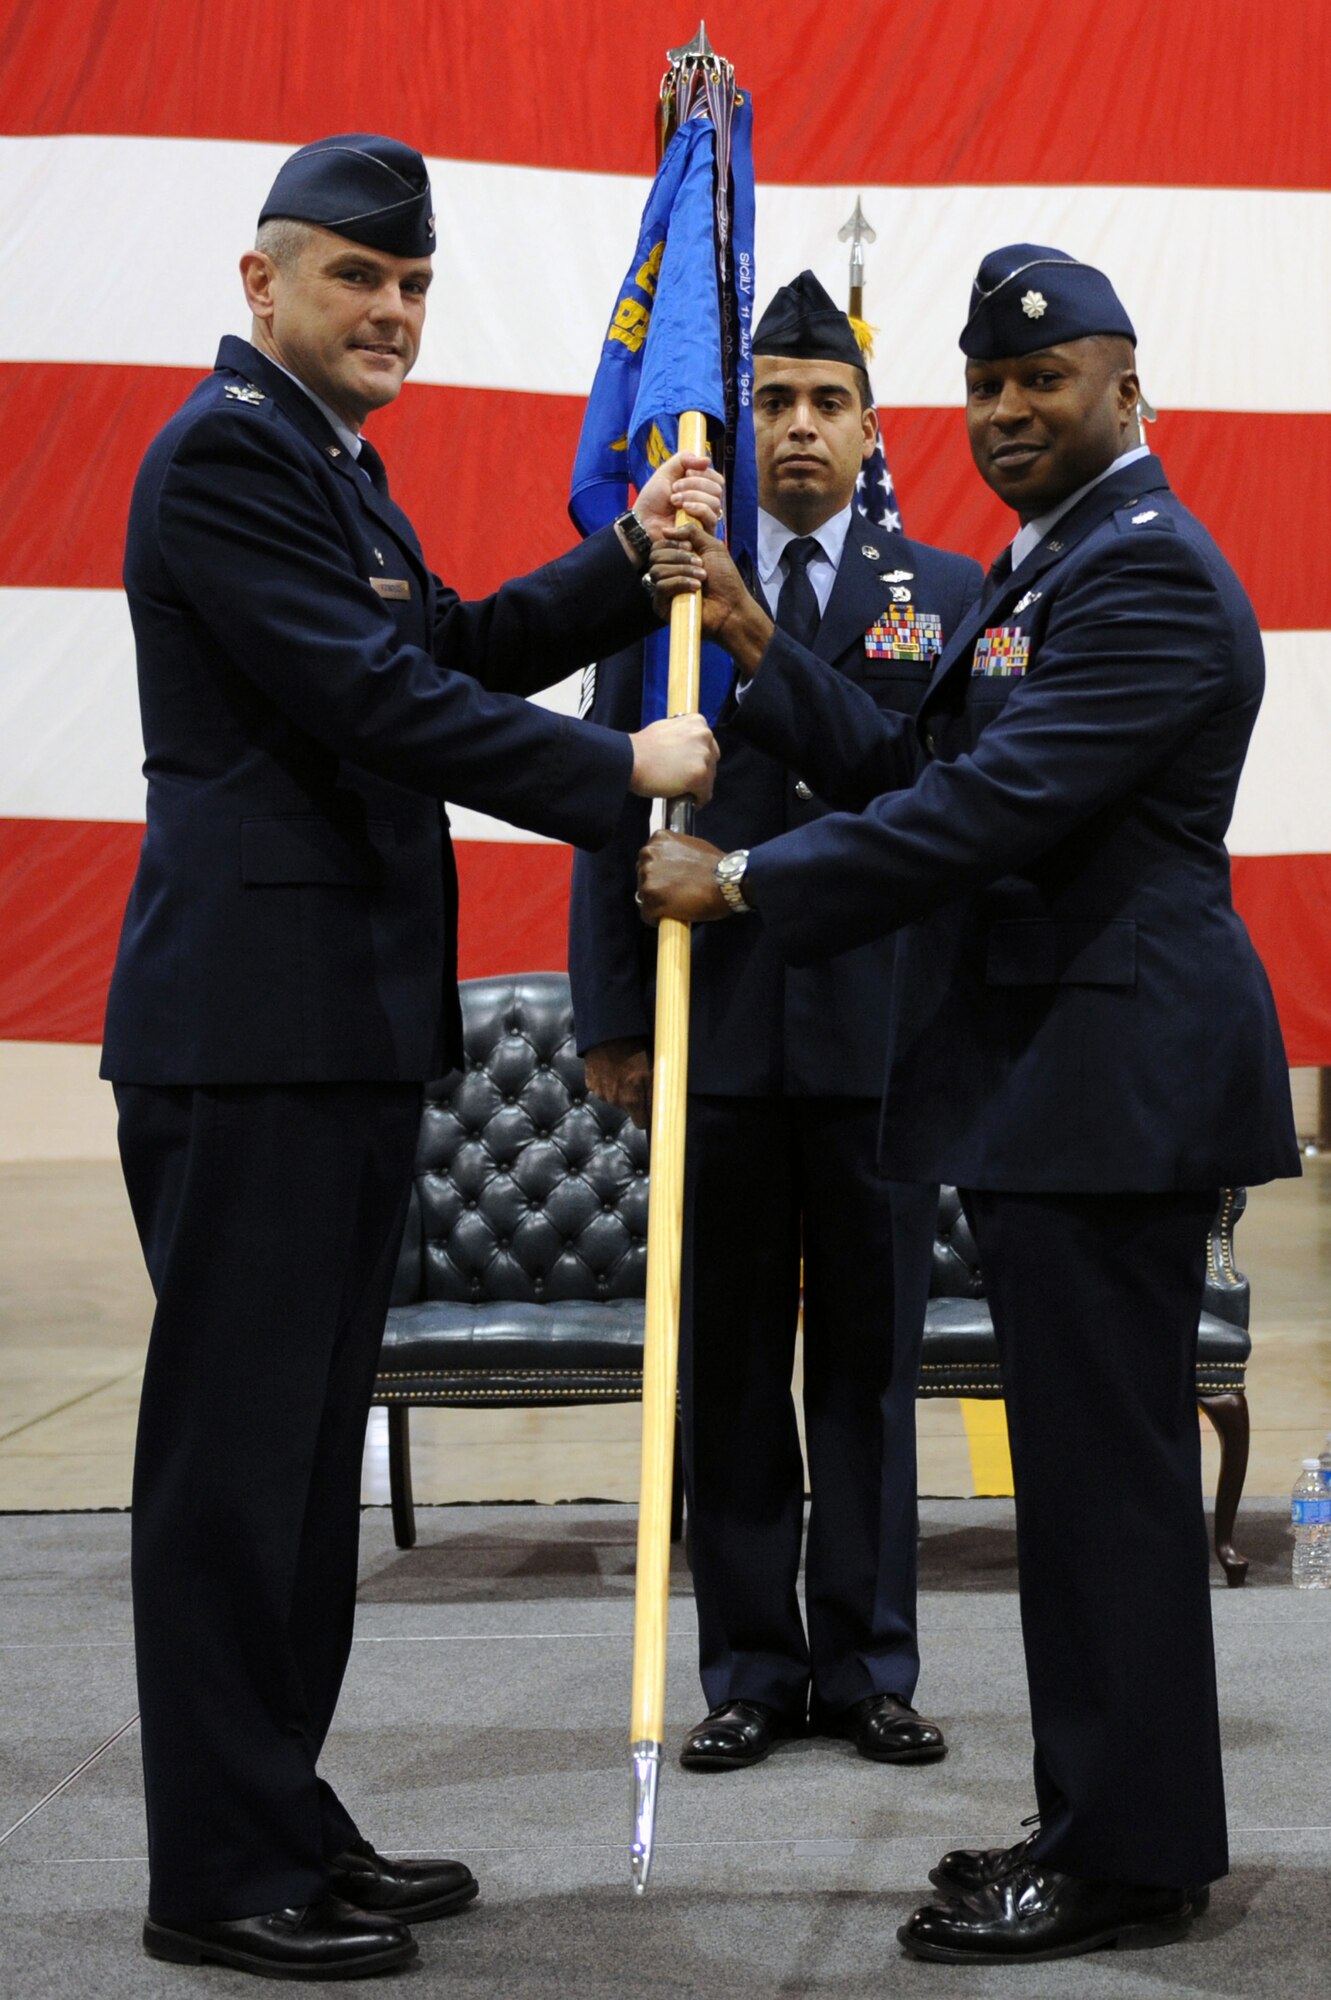 Lt. Col. Brian Watkins (right), the new 53rd Airlift Squadron commander, accepts the guidon from Col. Andrew McIntyre, 19th Operations Group commander, Dec. 20, 2011,during a change of command ceremony at Little Rock Air Force Base, Ark. The 53rd AS employs 160 active duty Airmen and 10 C-130 aircraft to provide worldwide combat airlift. Lt. Col. Ken Kopp, incoming 515th Air Mobility Operations Group deputy group commander, relinquished command of the 53rd AS. (U.S. Air Force photo by Airman 1st Class Rusty Frank)